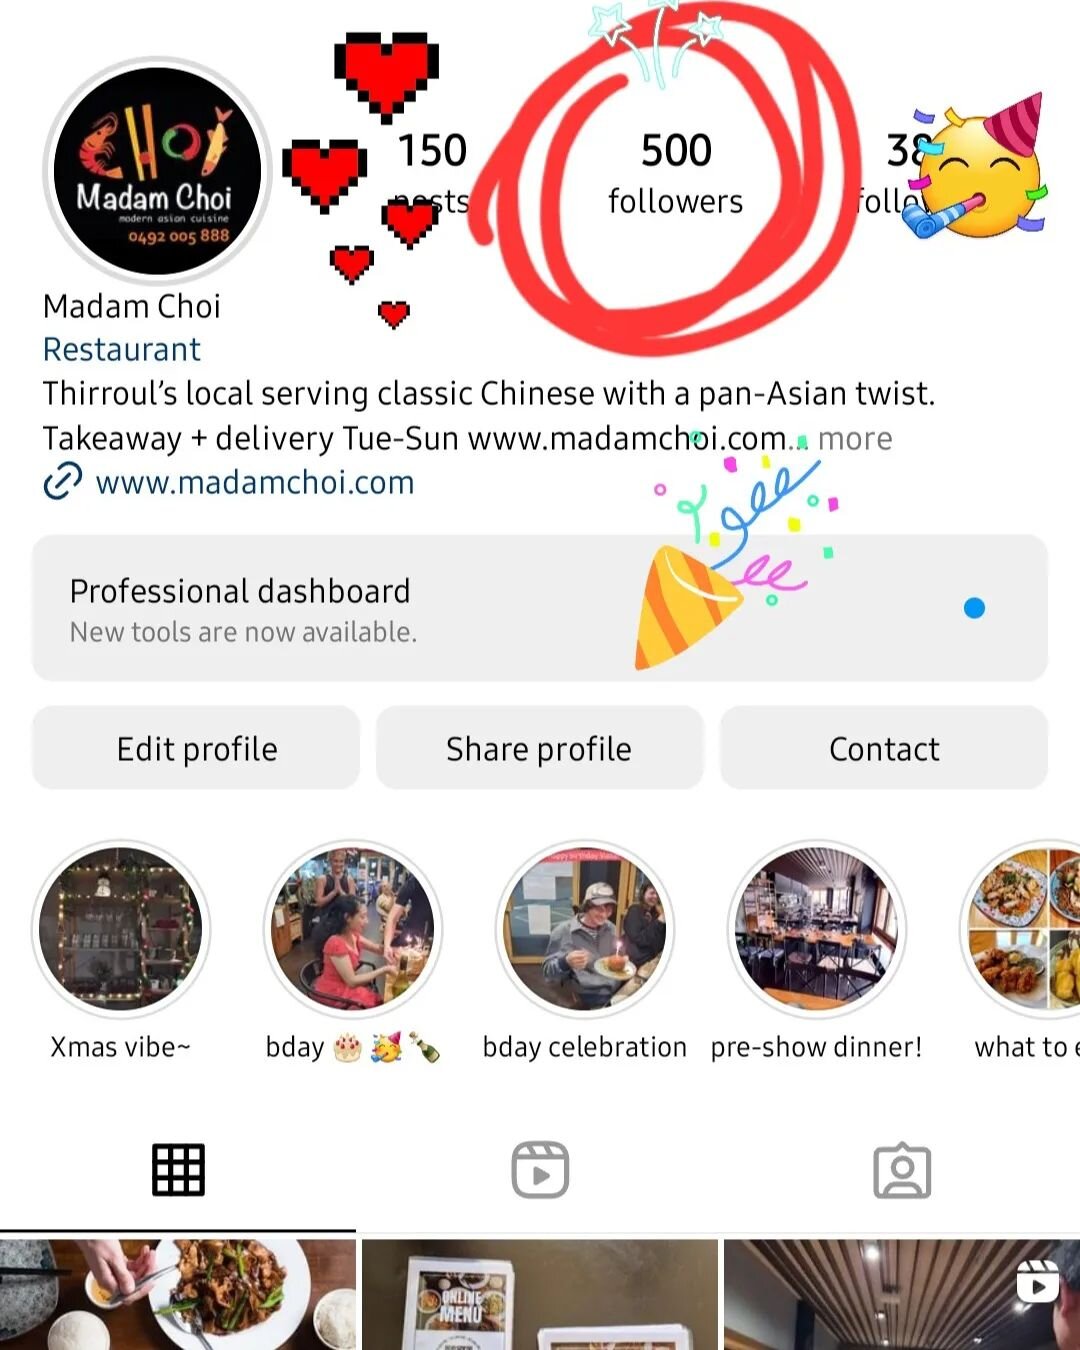 Yay~~~~~~~~~~
What a milestone! 🥳🥳🥳🥳🥳
Super happy that we have achieved 500 followers on instagram!!!
I feel grateful and so rewarded that people gradually recognise our constant effort sharing who we are and what we do. 
I am so~~~~~ happy 😊 ?